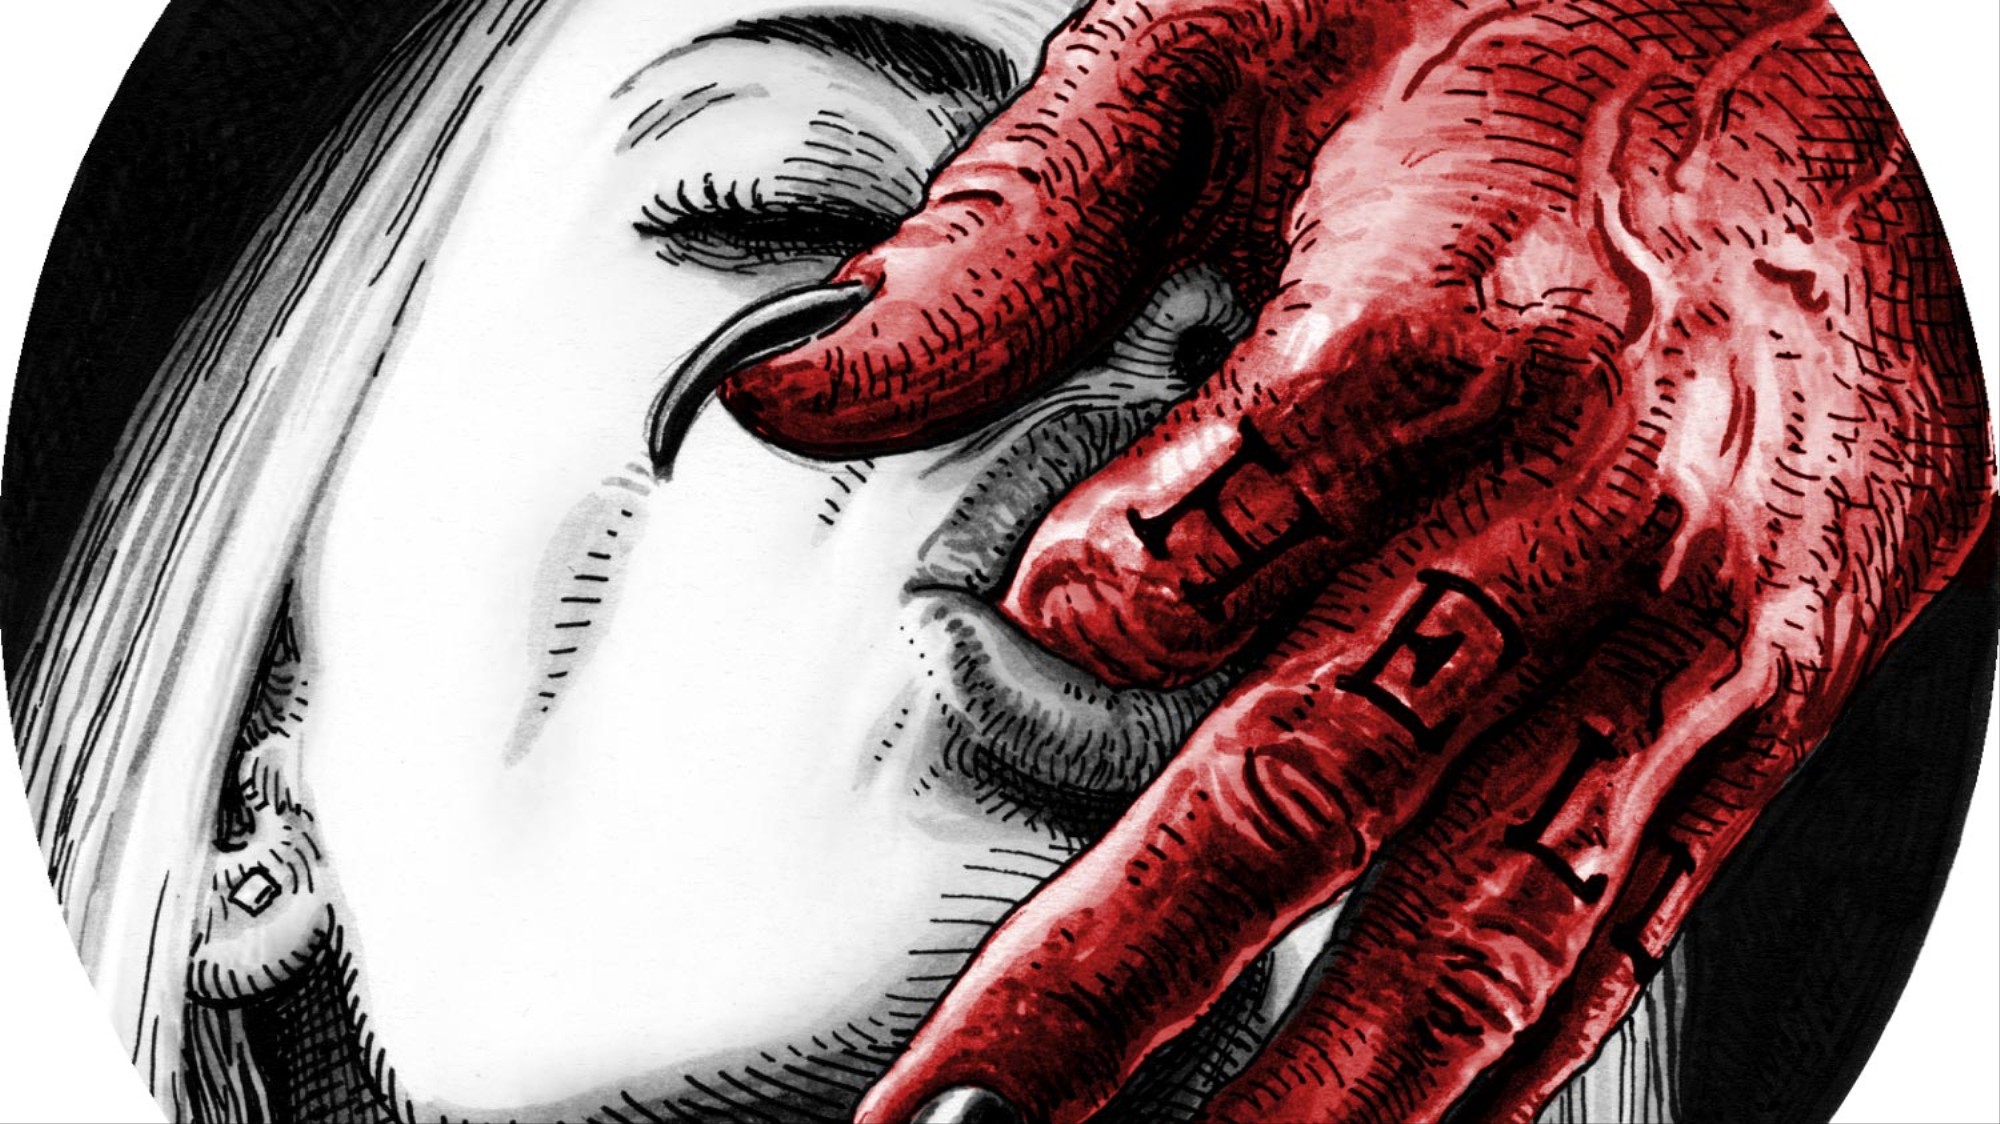 Rough Gangbang Drawn Sex - NSFW] These Devilish Illustrations Are Sinfully Sexy - VICE